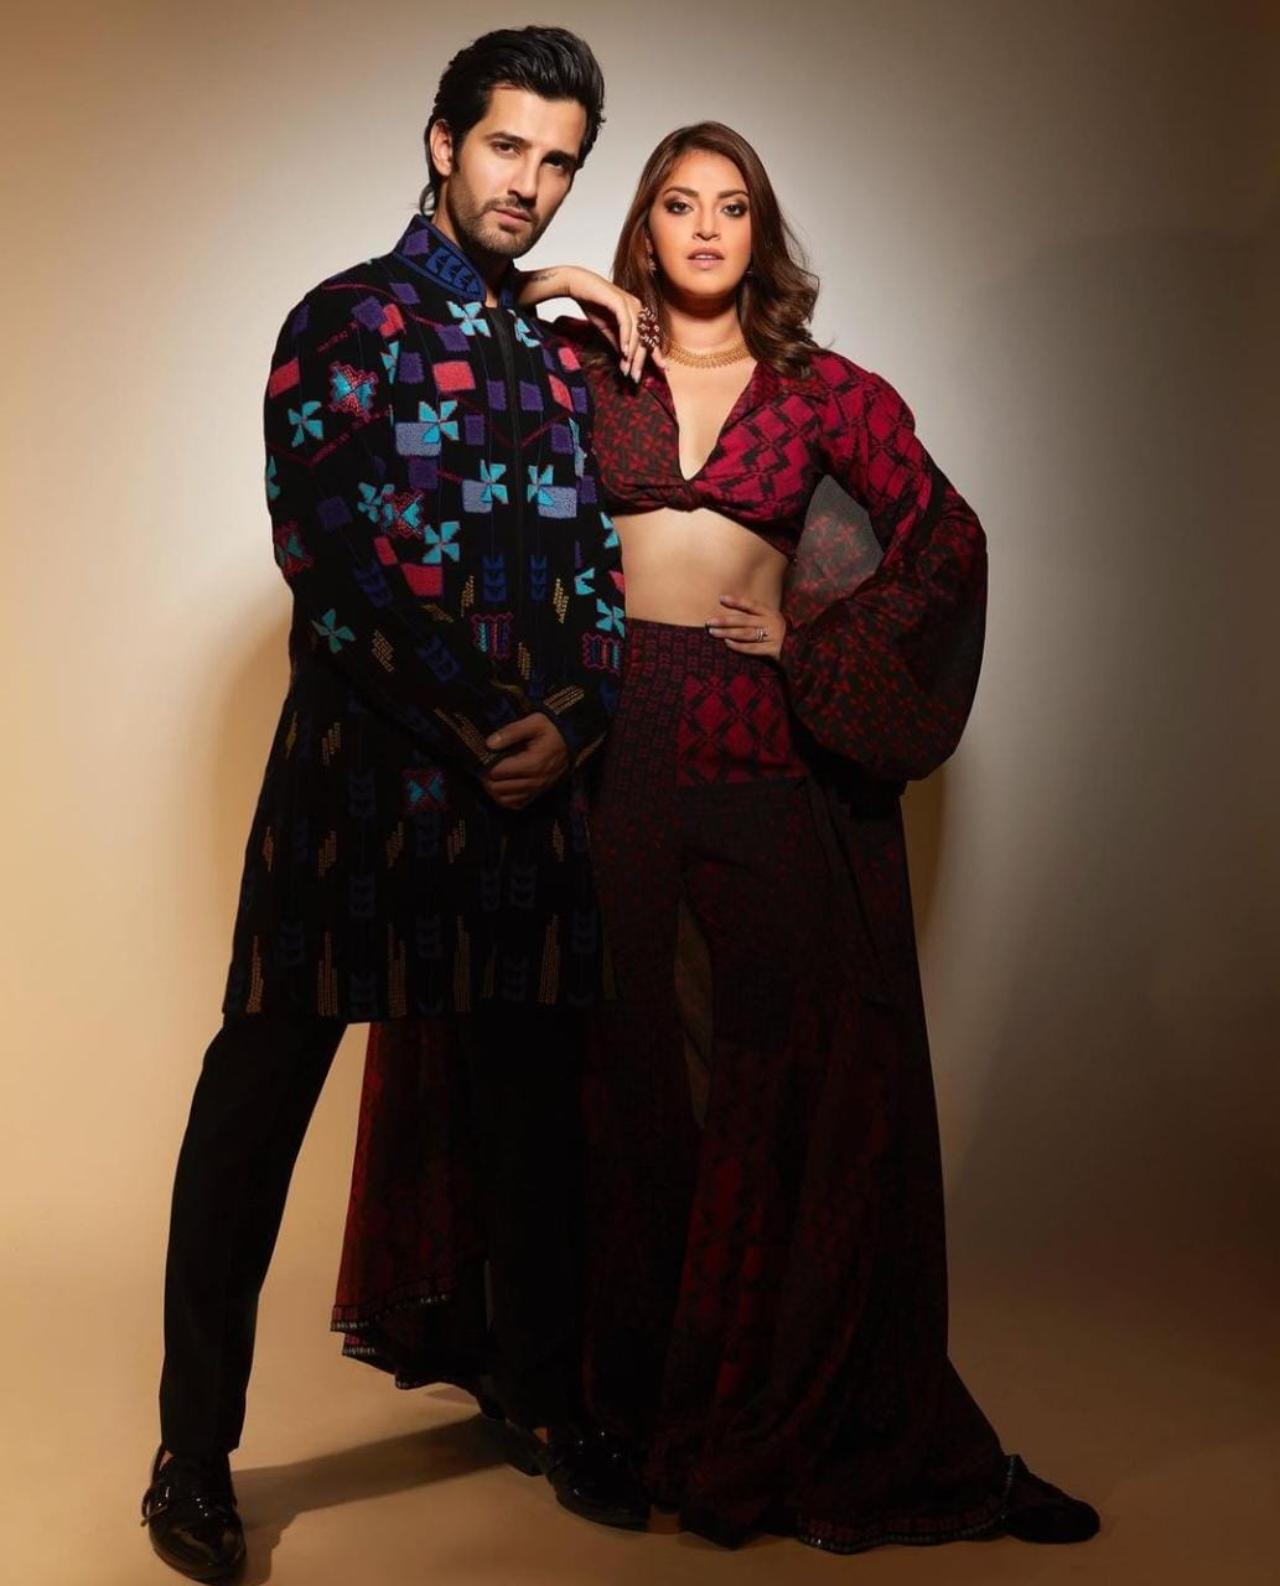 Well the best is always at the end, to end this perfect couple goal list we have a beautiful shot of Aditya and Anushka wearing modern traditional outfits. Aditya looks ravishing as he wears a traditional kurta with geometrical designs printed on it, whilst Anushka is caught in a sensational modern traditional red two piece with multi structured designs printed on it. The couple together make a smashing pair.